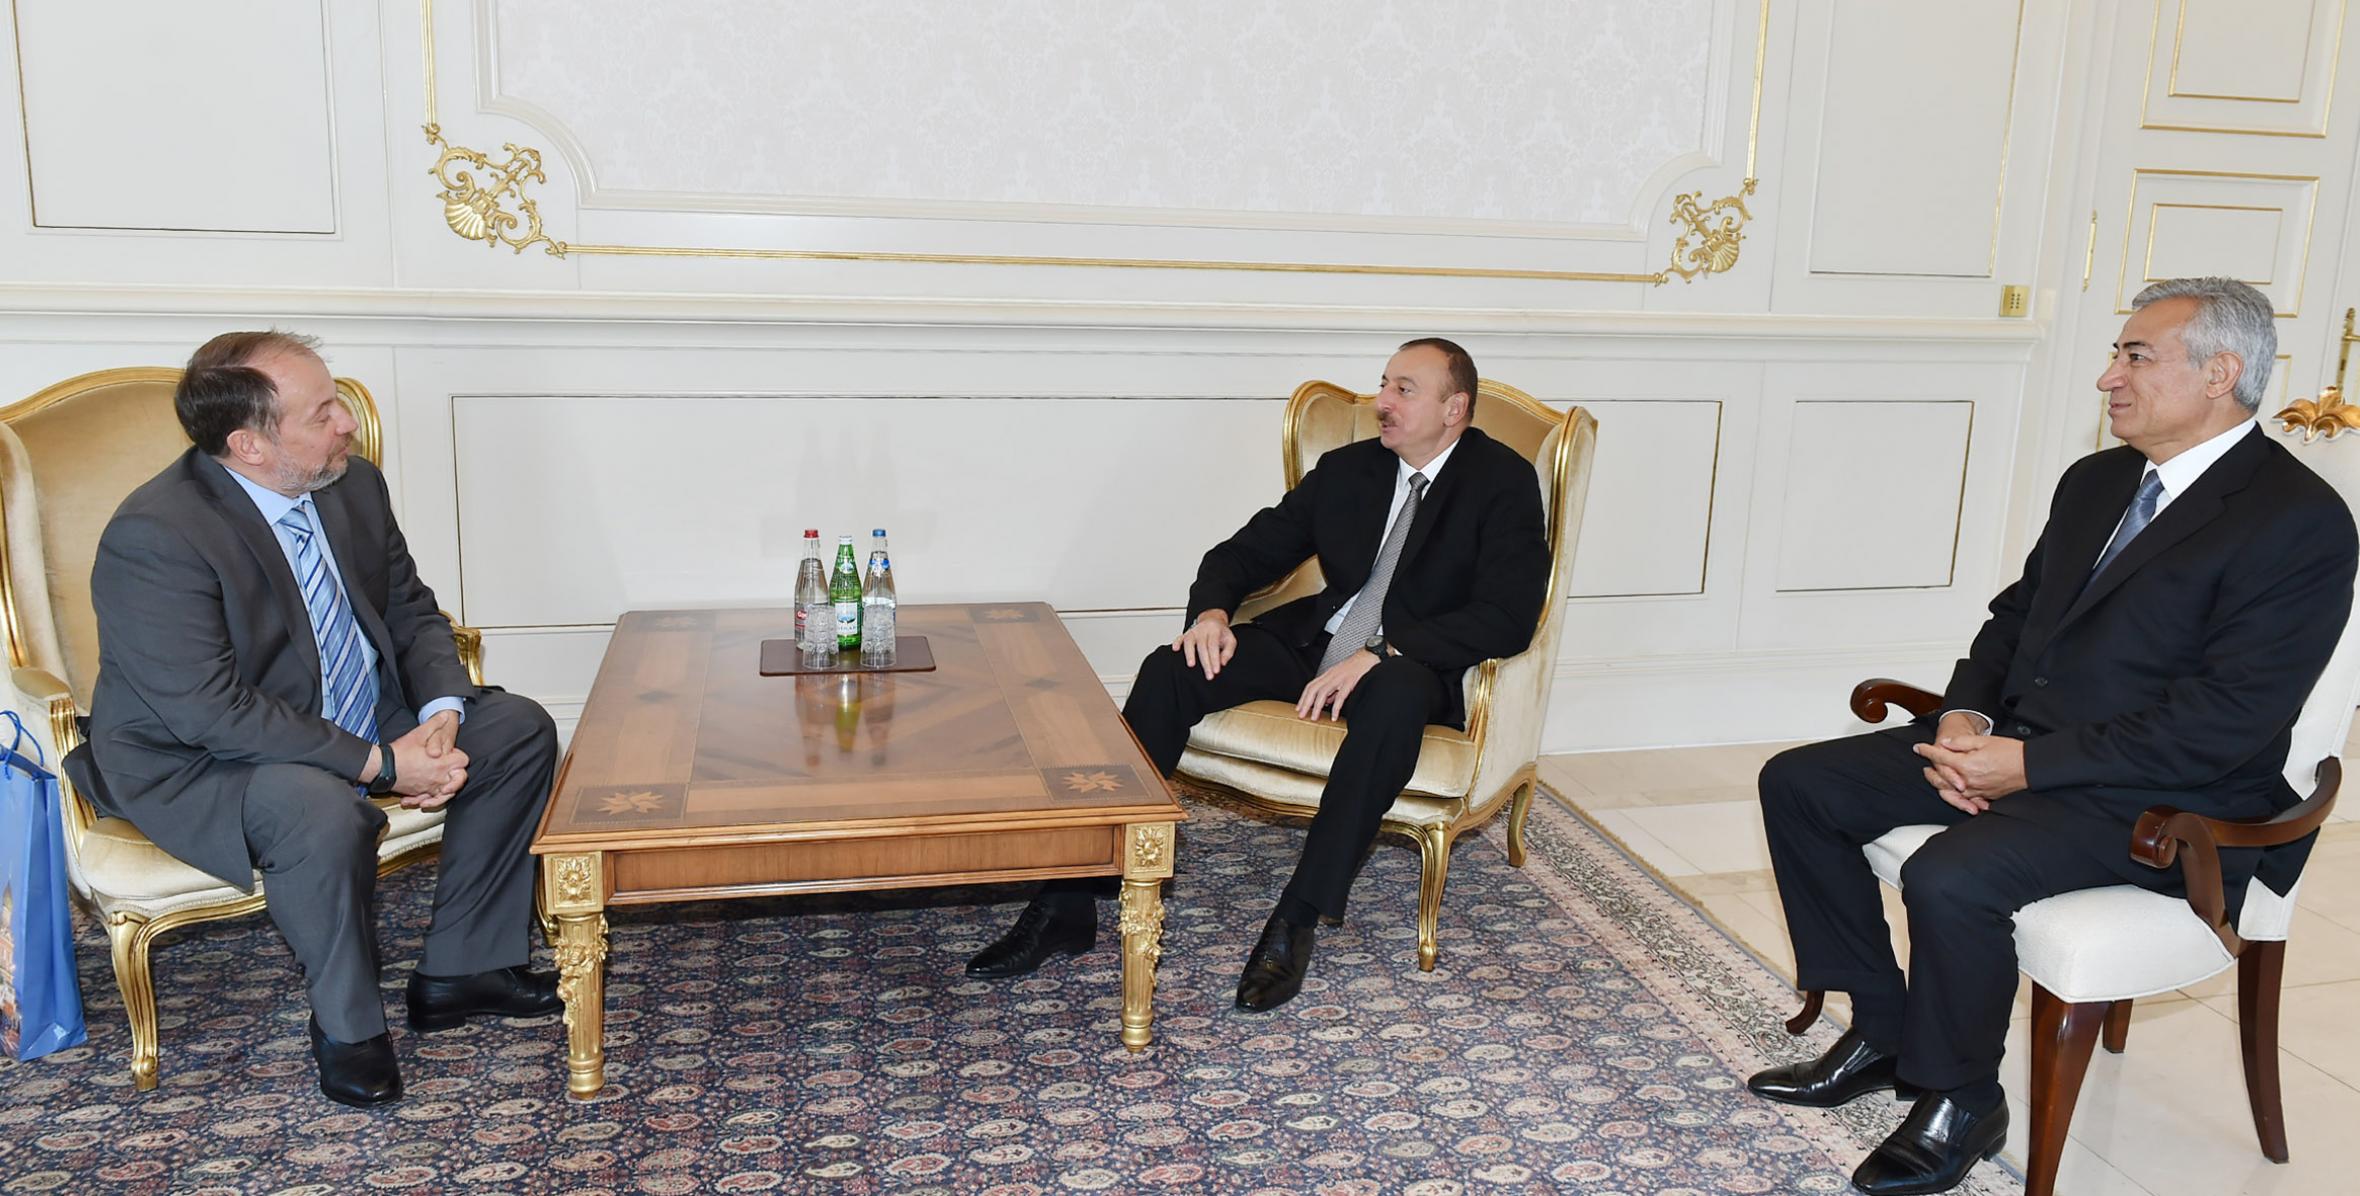 Ilham Aliyev received the President of the European Shooting Confederation and Russian Shooting Union